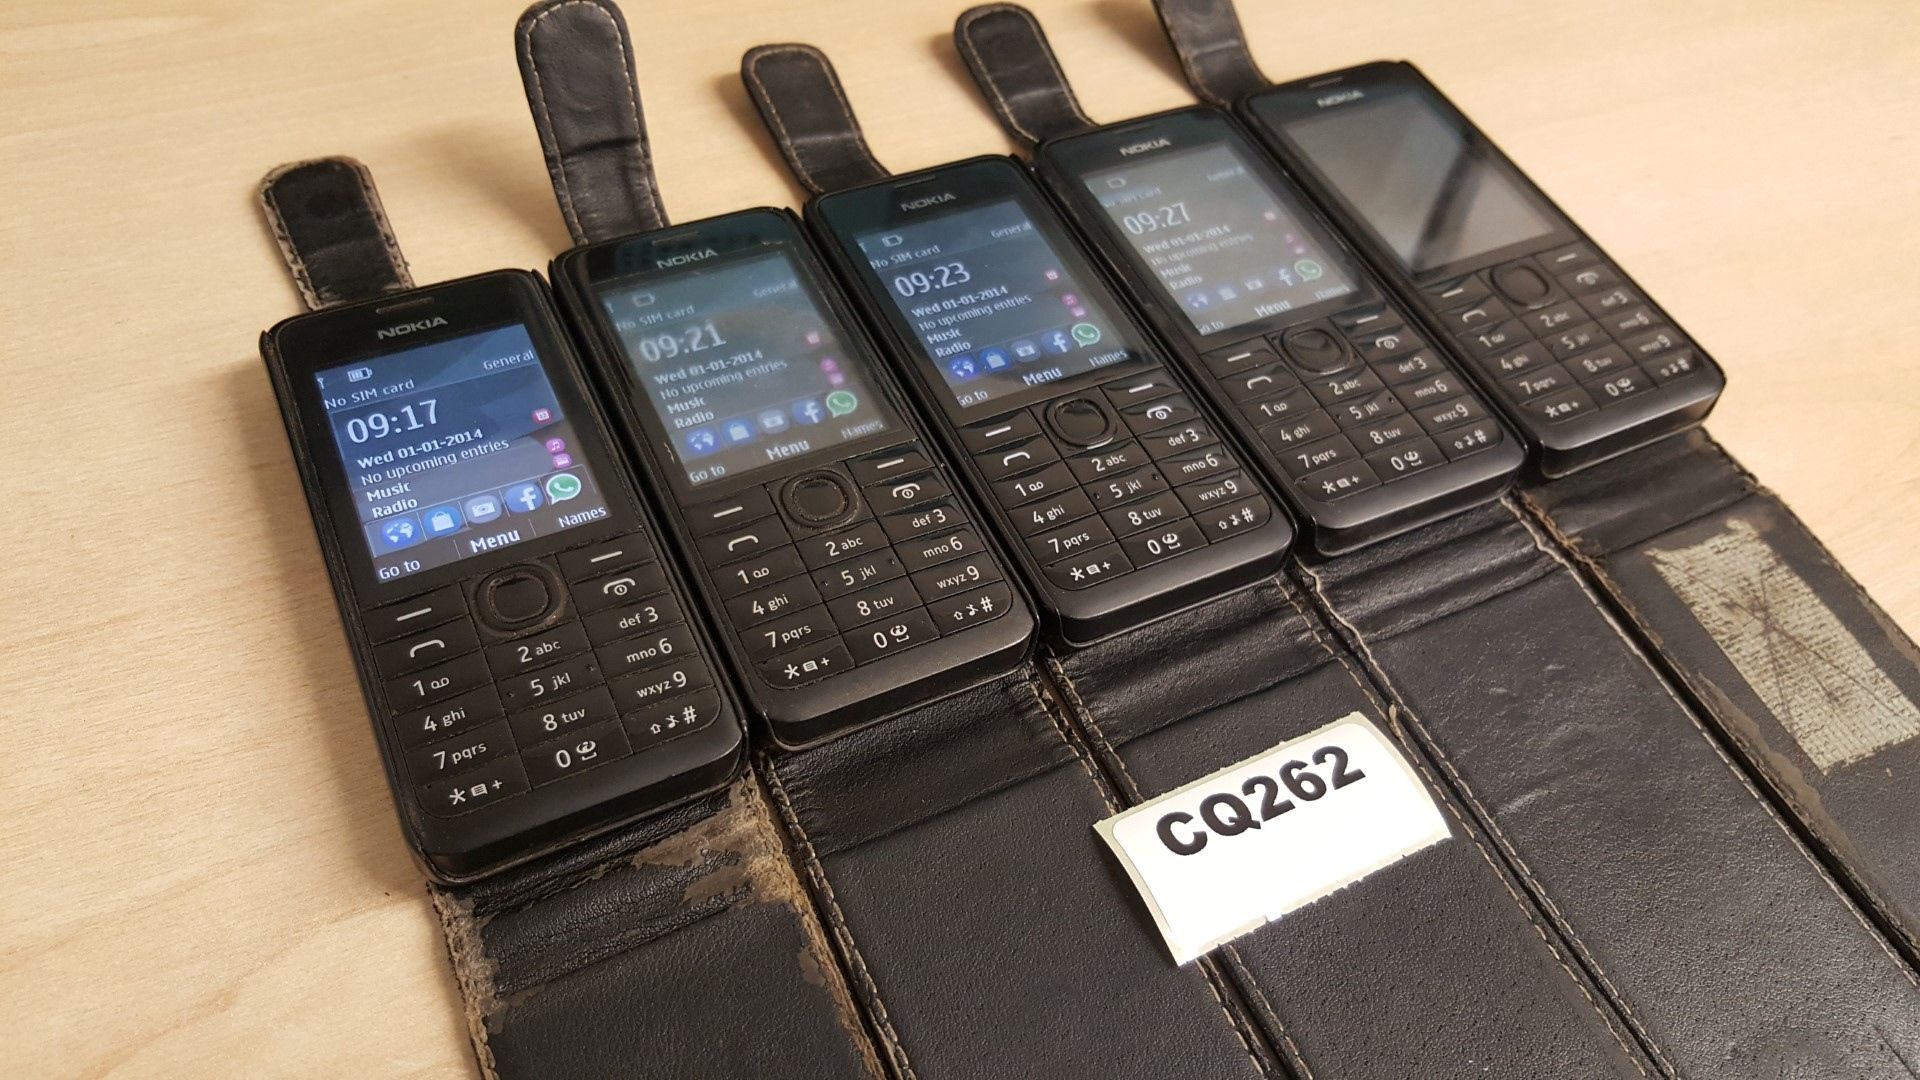 5 x Nokia 301 Mobile Phones With Cases- Ref CQ262 - Image 2 of 2